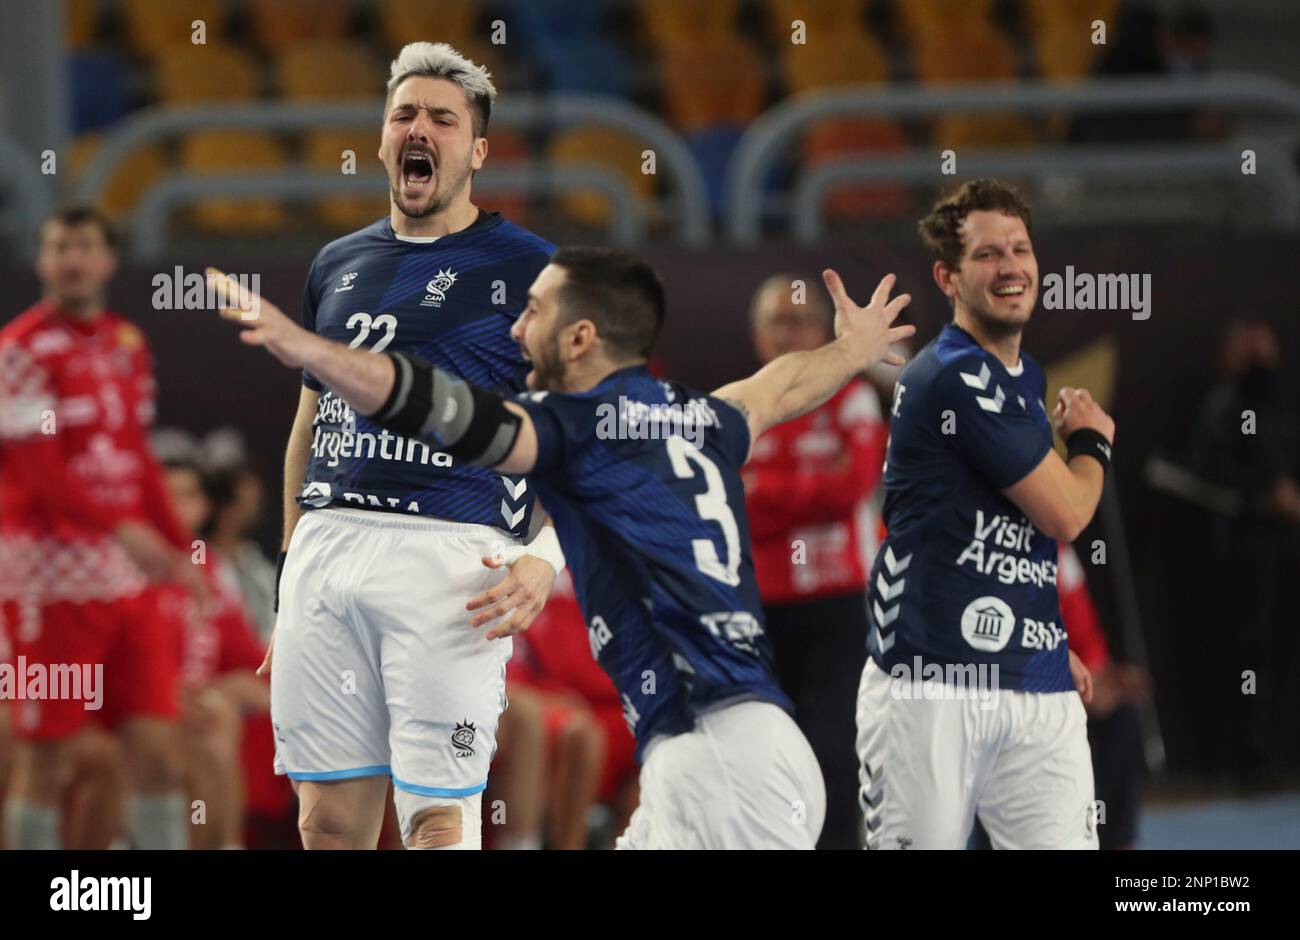 Argentinas players celebrate during the World Handball Championship against Croatia in Cairo, Egypt, Satruday, Feb